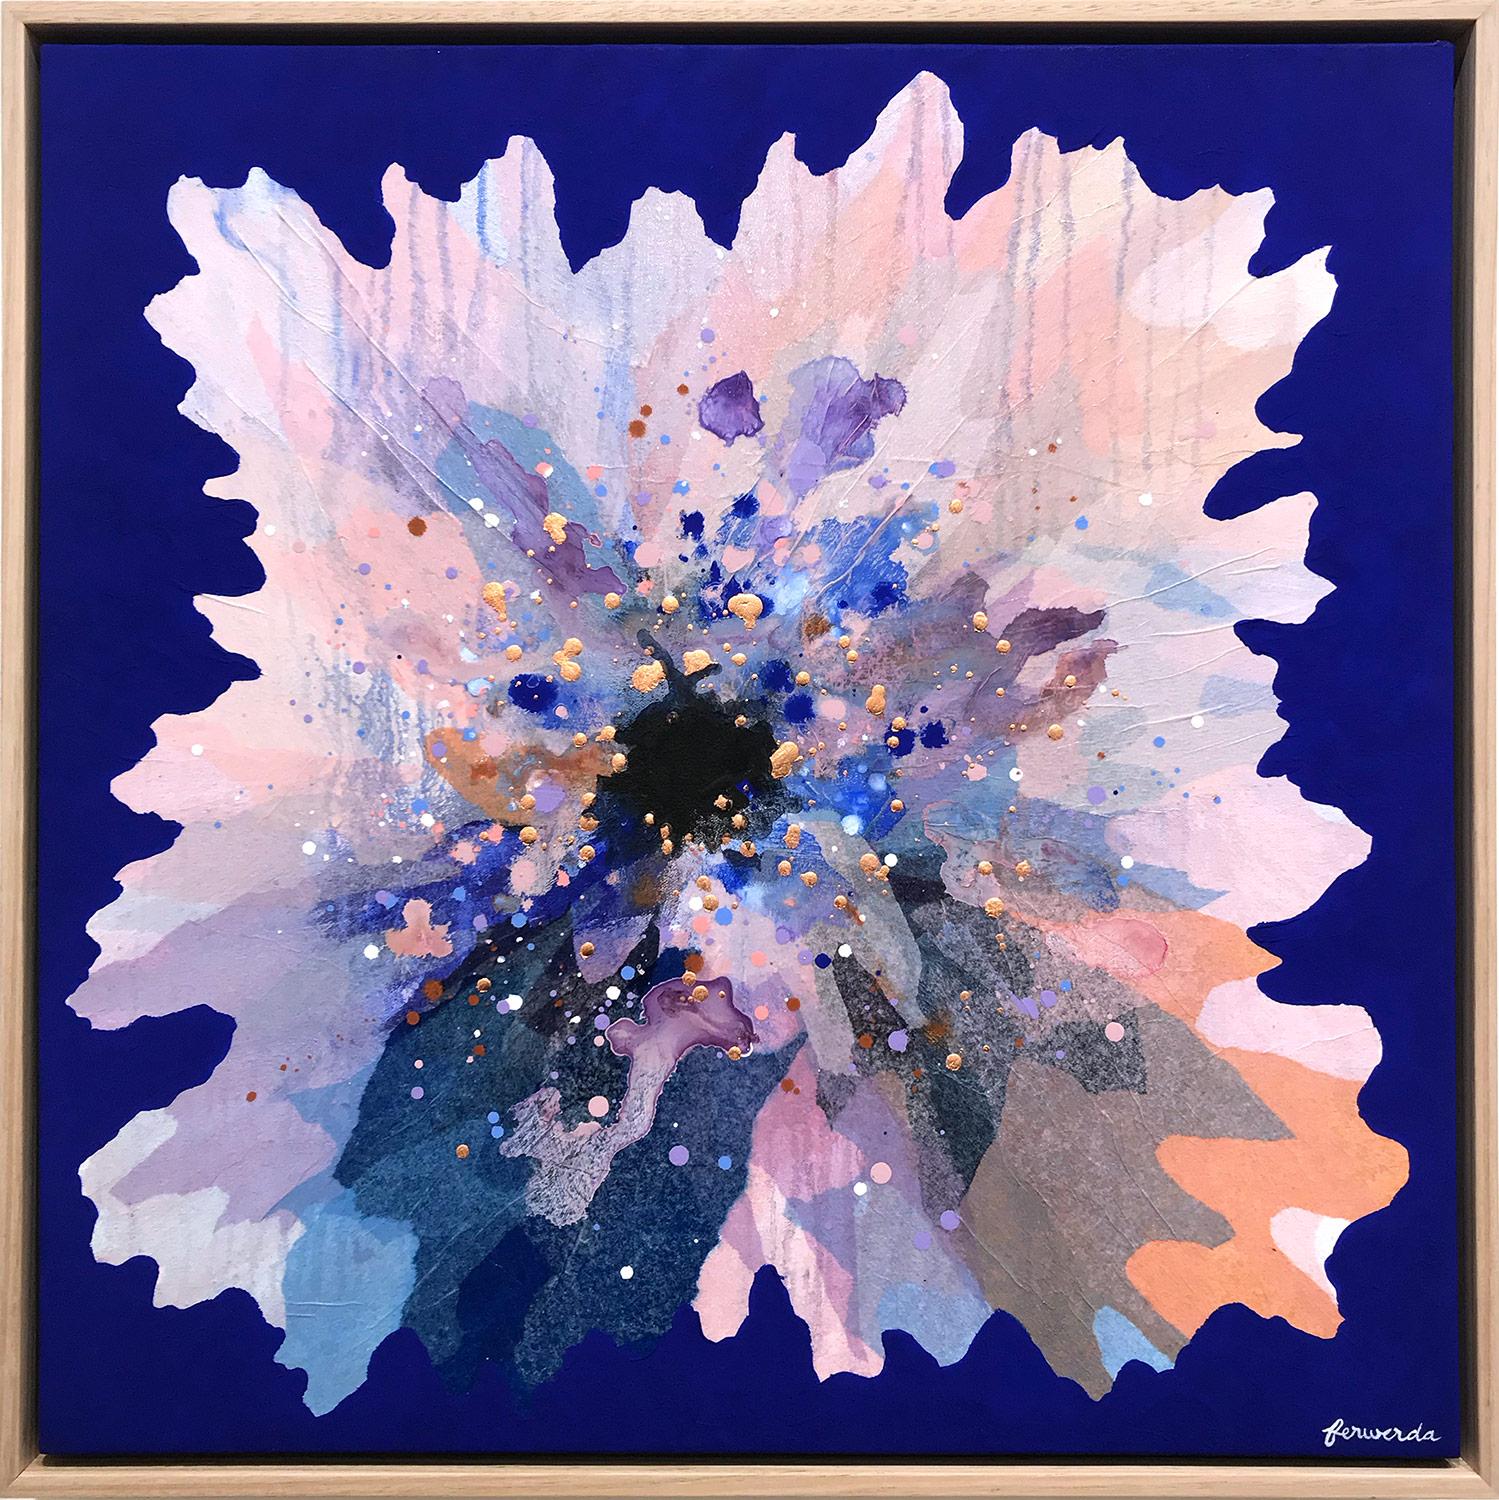 "Cobalt Periwinkle" Contemporary Layered Mixed Media Floral Painting on Canvas